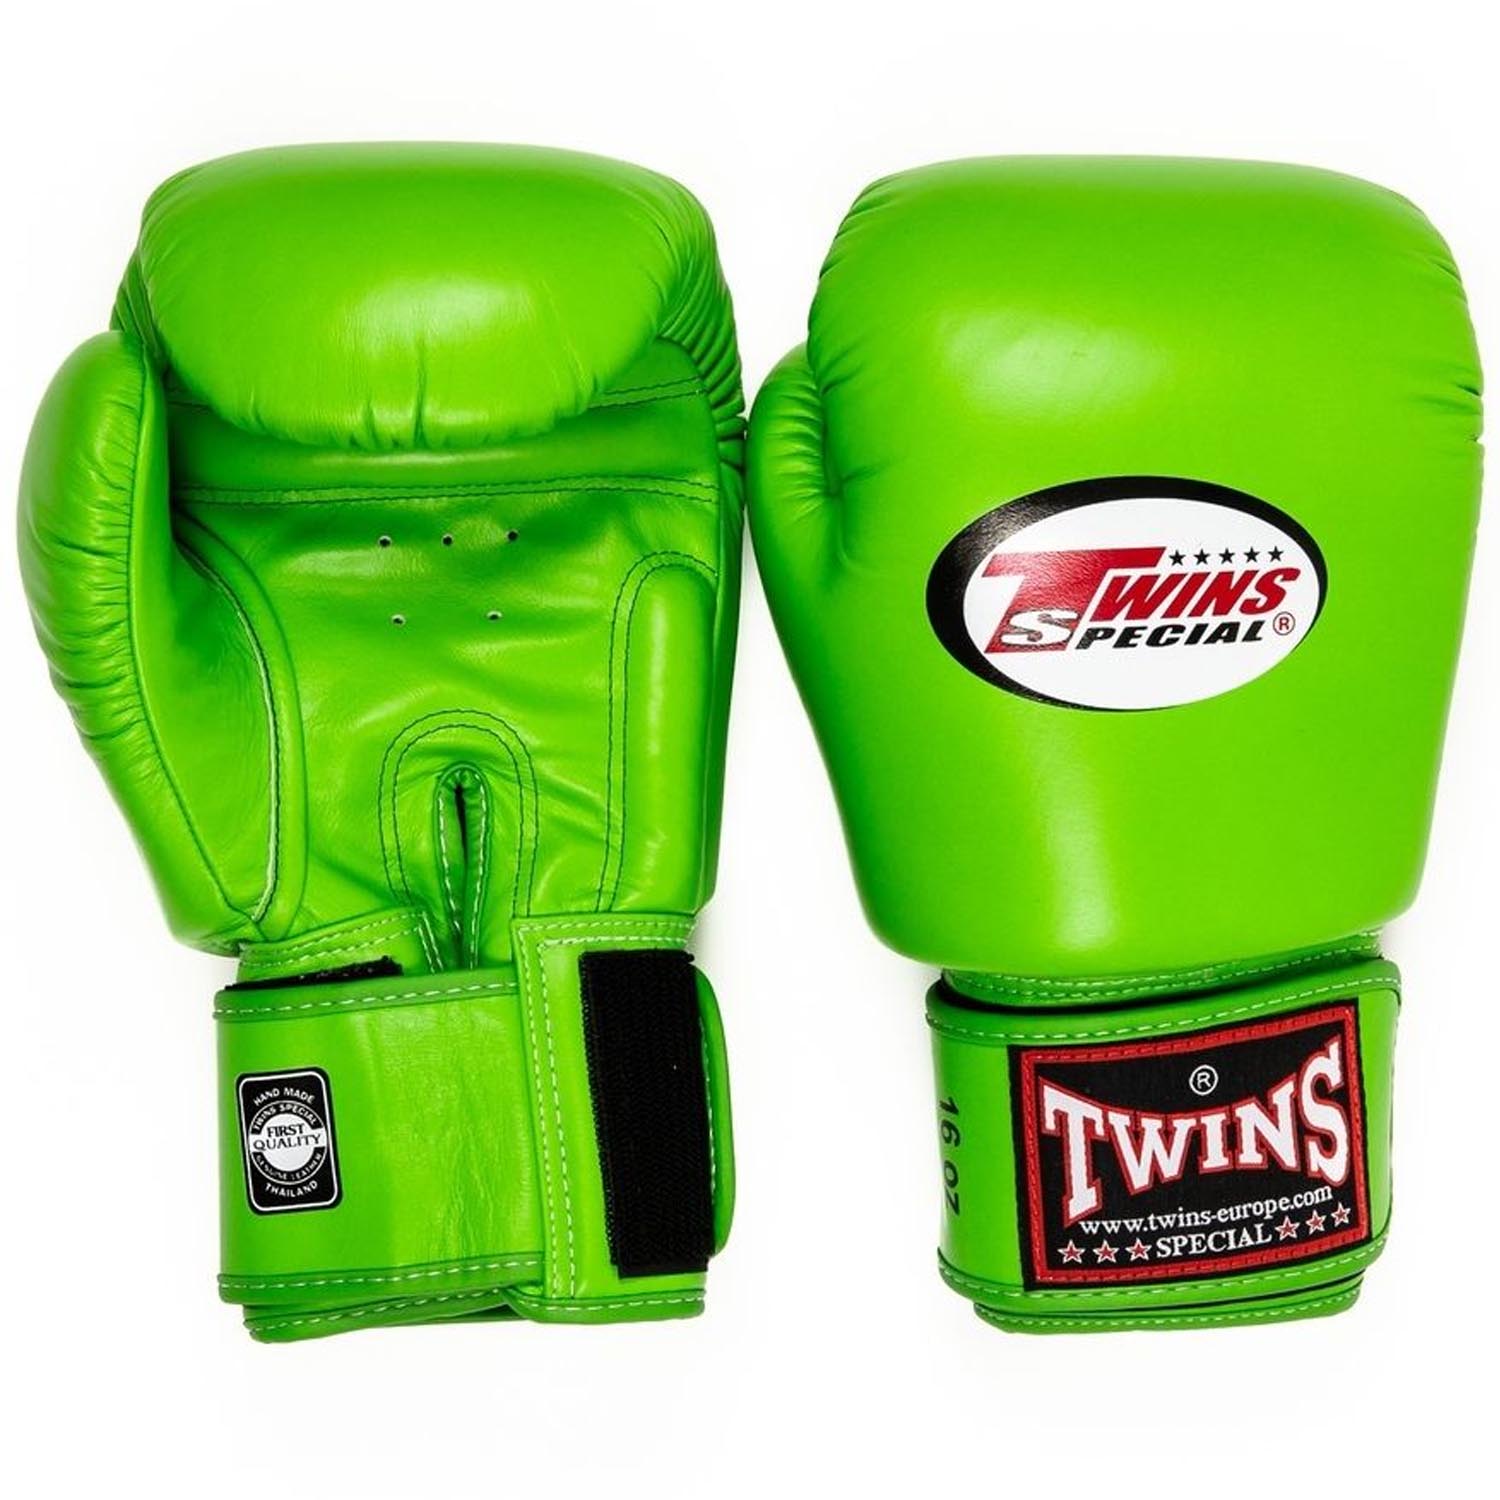 TWINS Special Boxing Gloves, BGBL3, lime